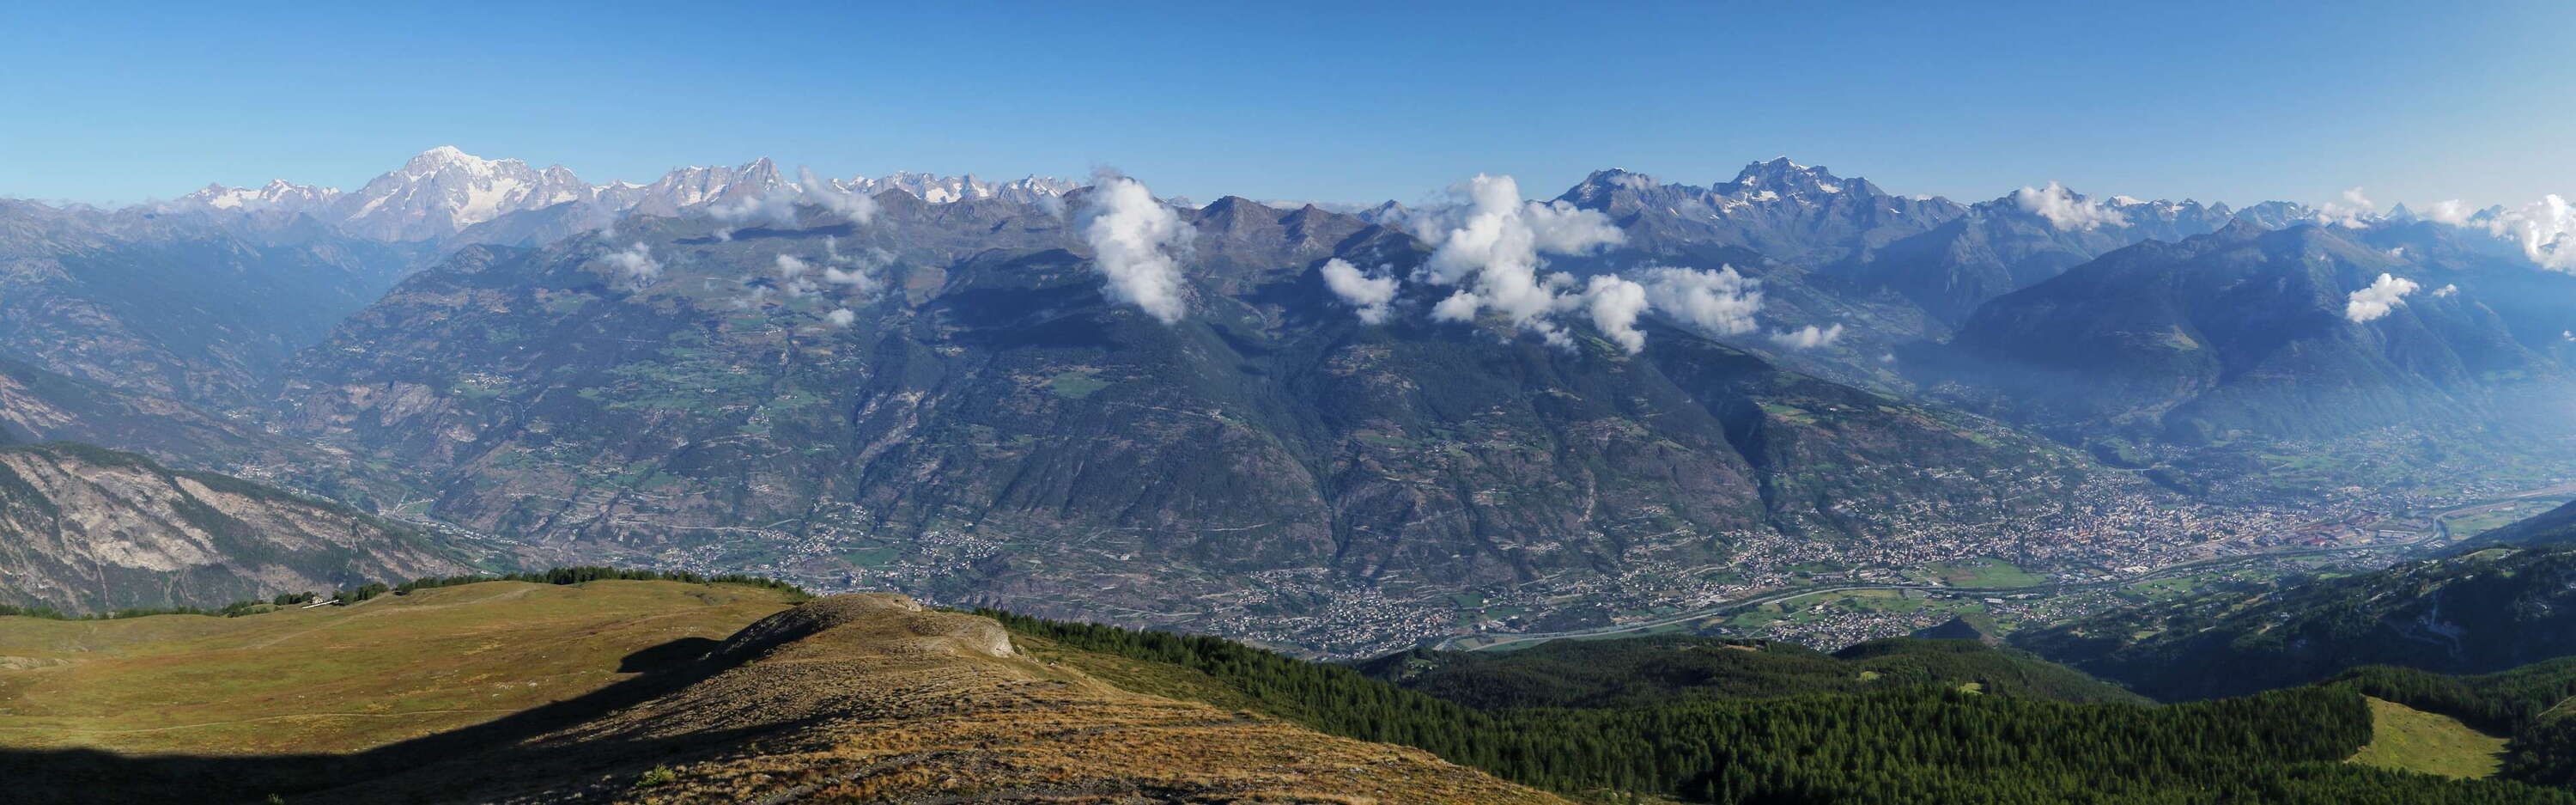 Aosta Valley | Panoramic view